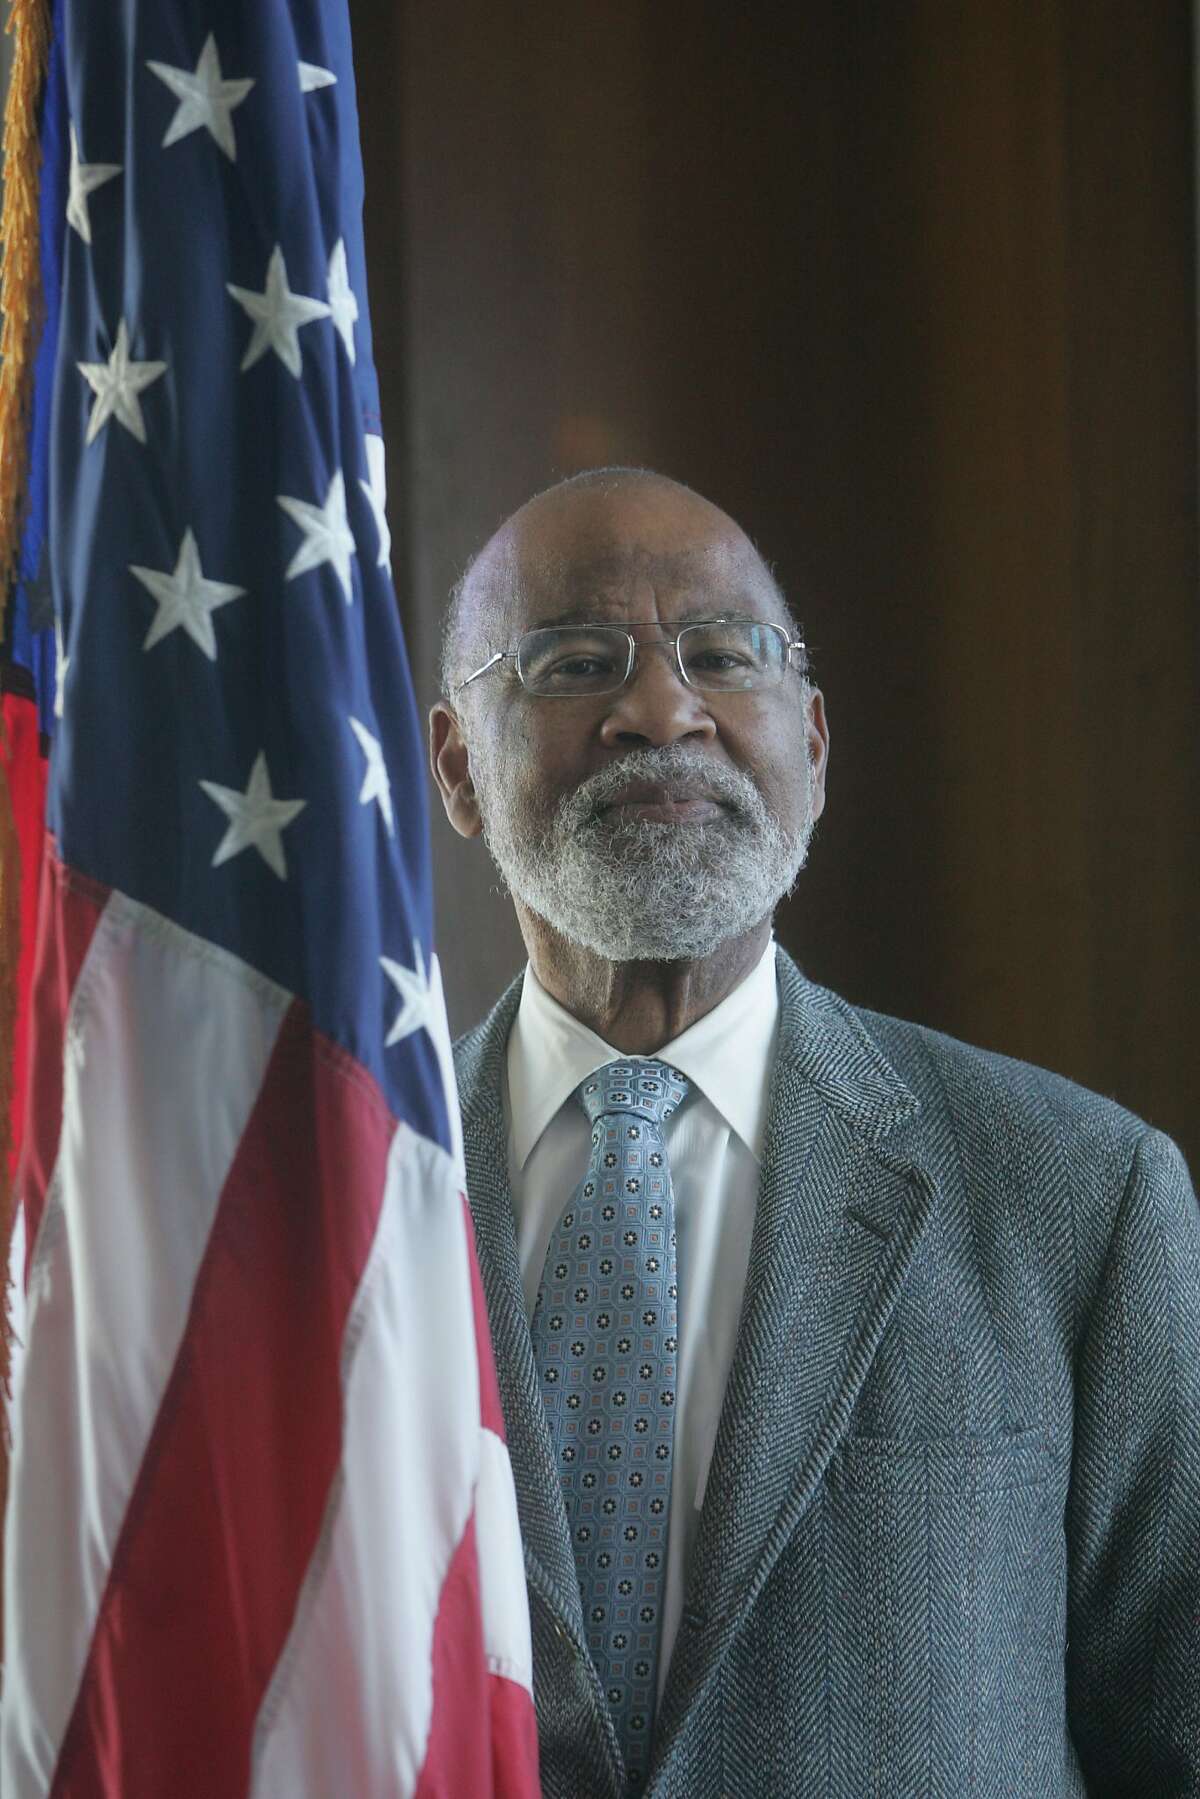 Judge Thelton Henderson is one of the best known, and perhaps one of the most controversial judges, in the state, striking down Proposition 187, the anti-affirmative action measure, lashing out at state officials over the treatment of prisoners and giving veterans suffering from Agent Orange the right to sue. But he also has a fascinating past as a justice department lawyer in the 1960s working with Martin Luther King Jr. and other civil rights giants. measure, lashing out at state officials over the treatment of prisoners and giving veterans suffering from Agent Orange the right to sue. But he also has a fascinating past as a justice department lawyer in the 1960s working with Martin Luther King Jr. and other civil rights giants.